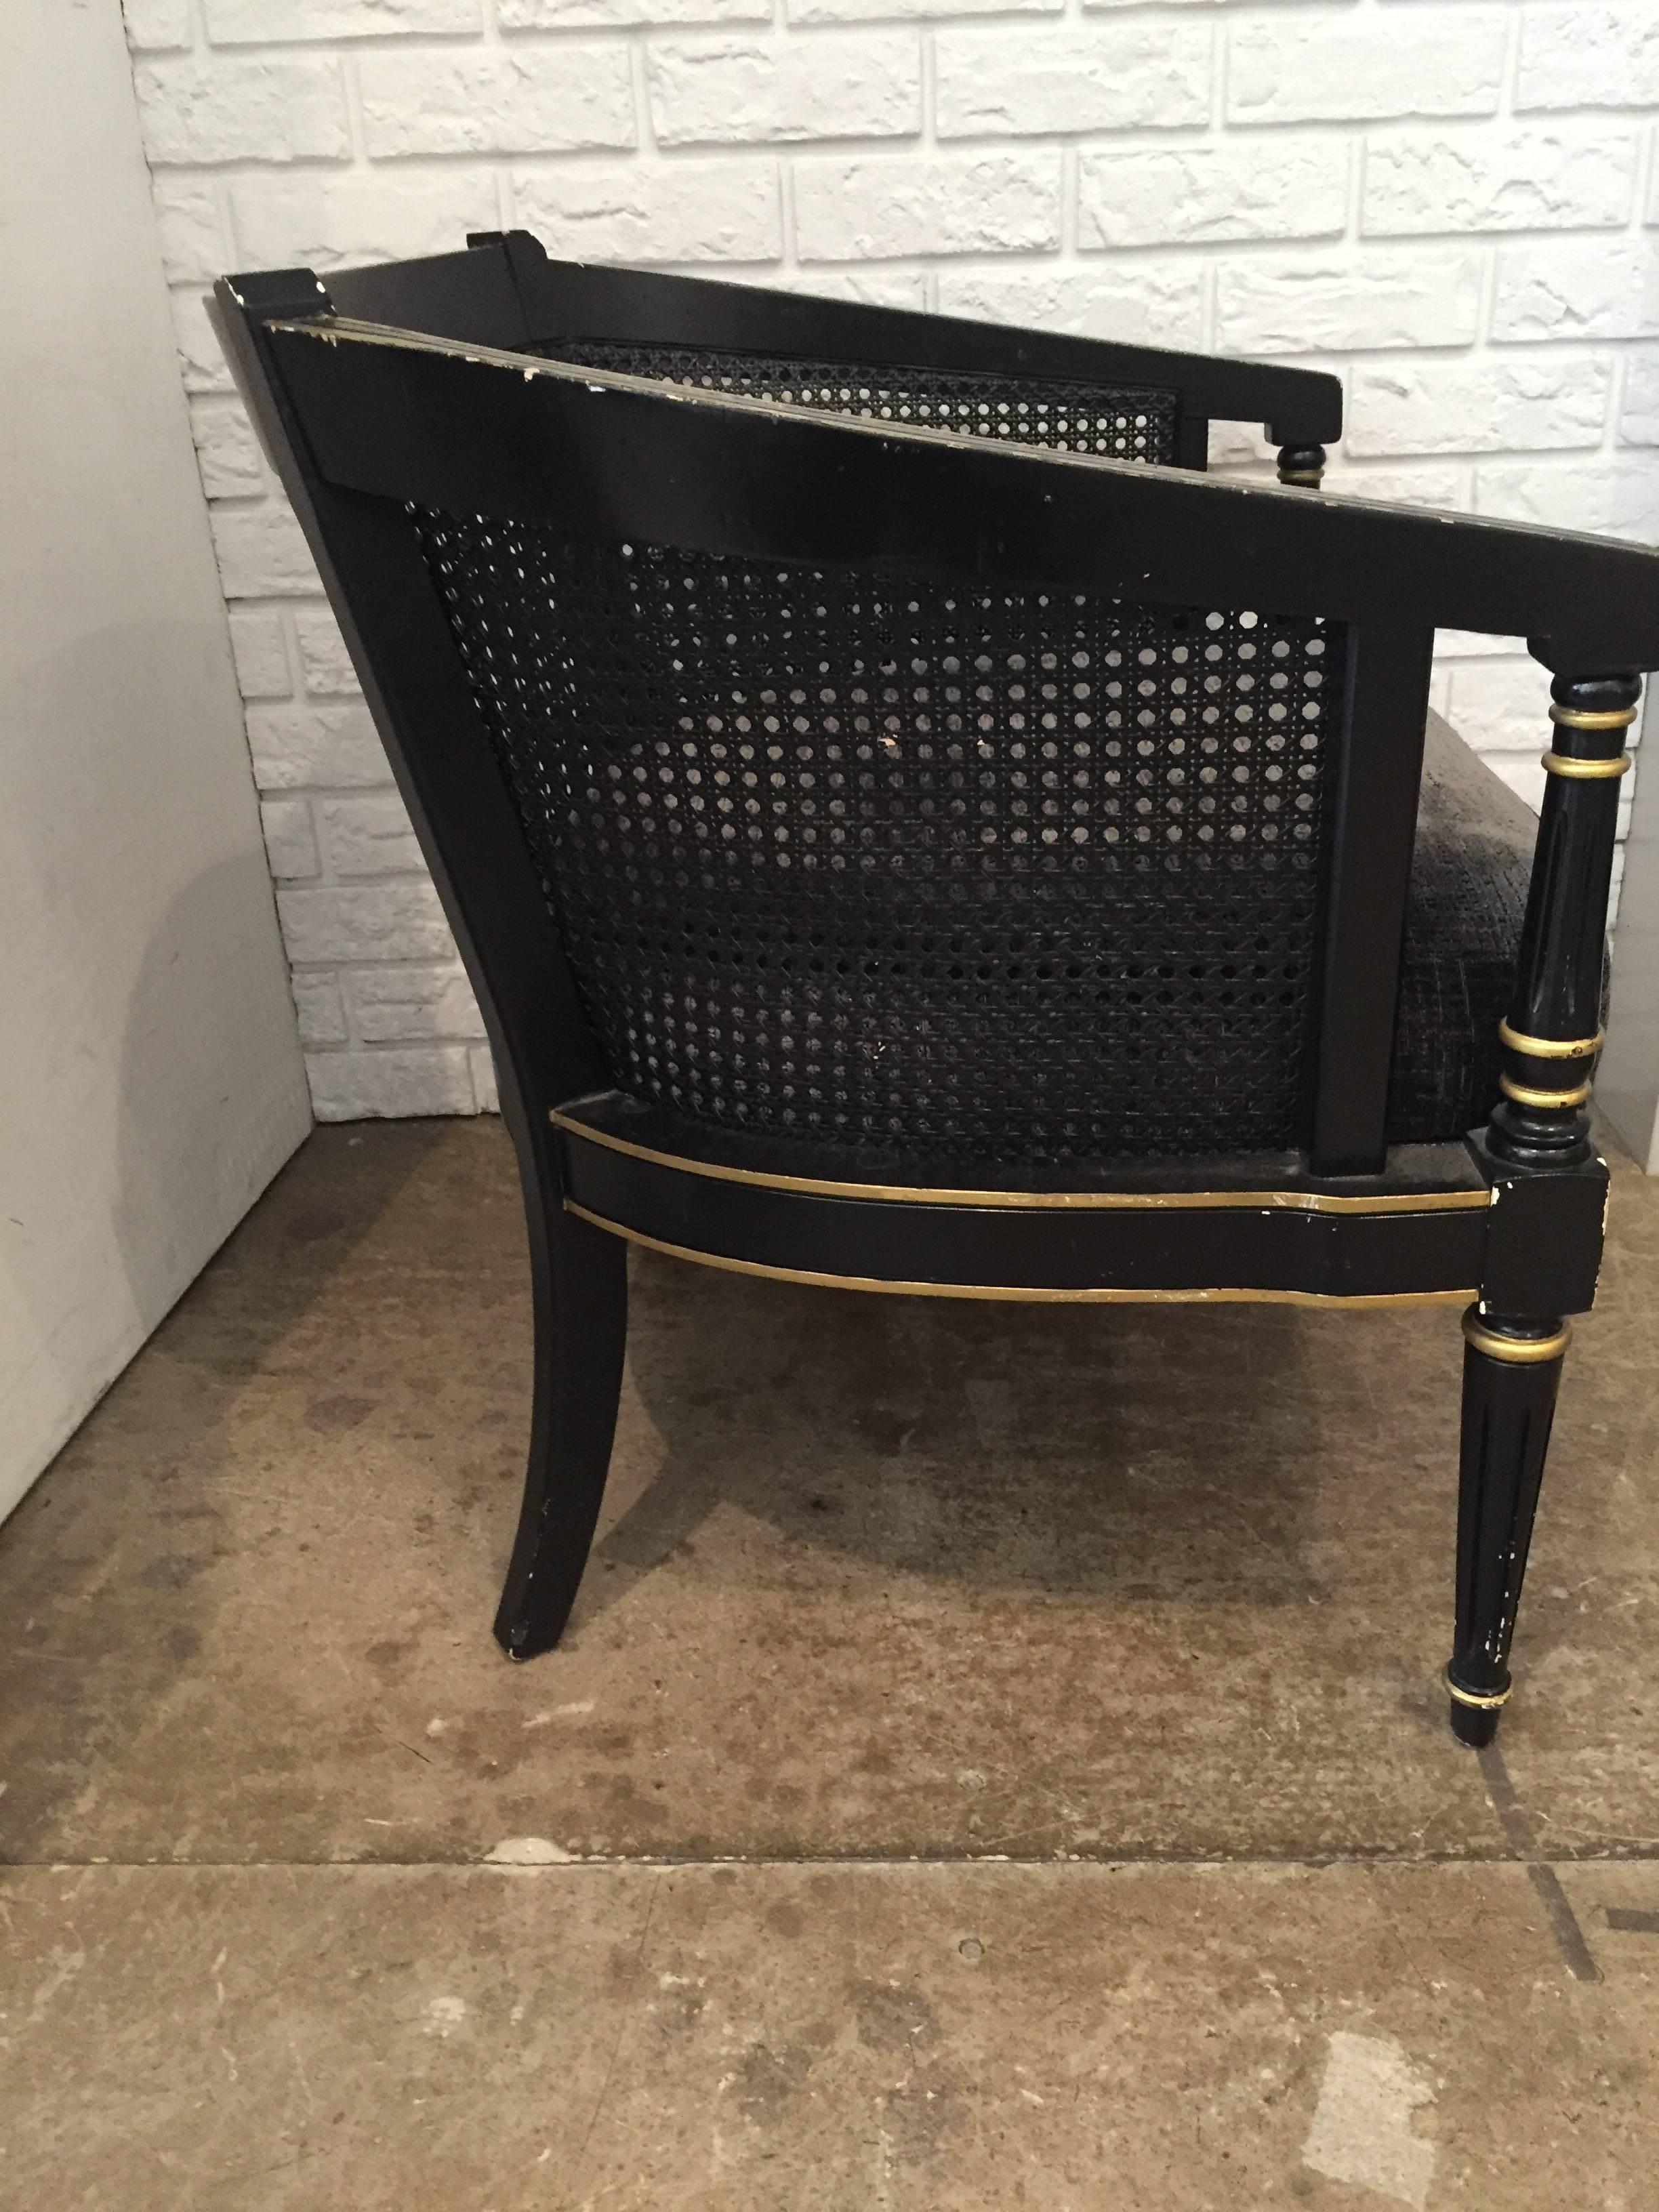 Pair of Empire-style barrel back chairs. Black base with gold leaf detail and cane back. Newly upholstered cushion in a textured charcoal velvet.